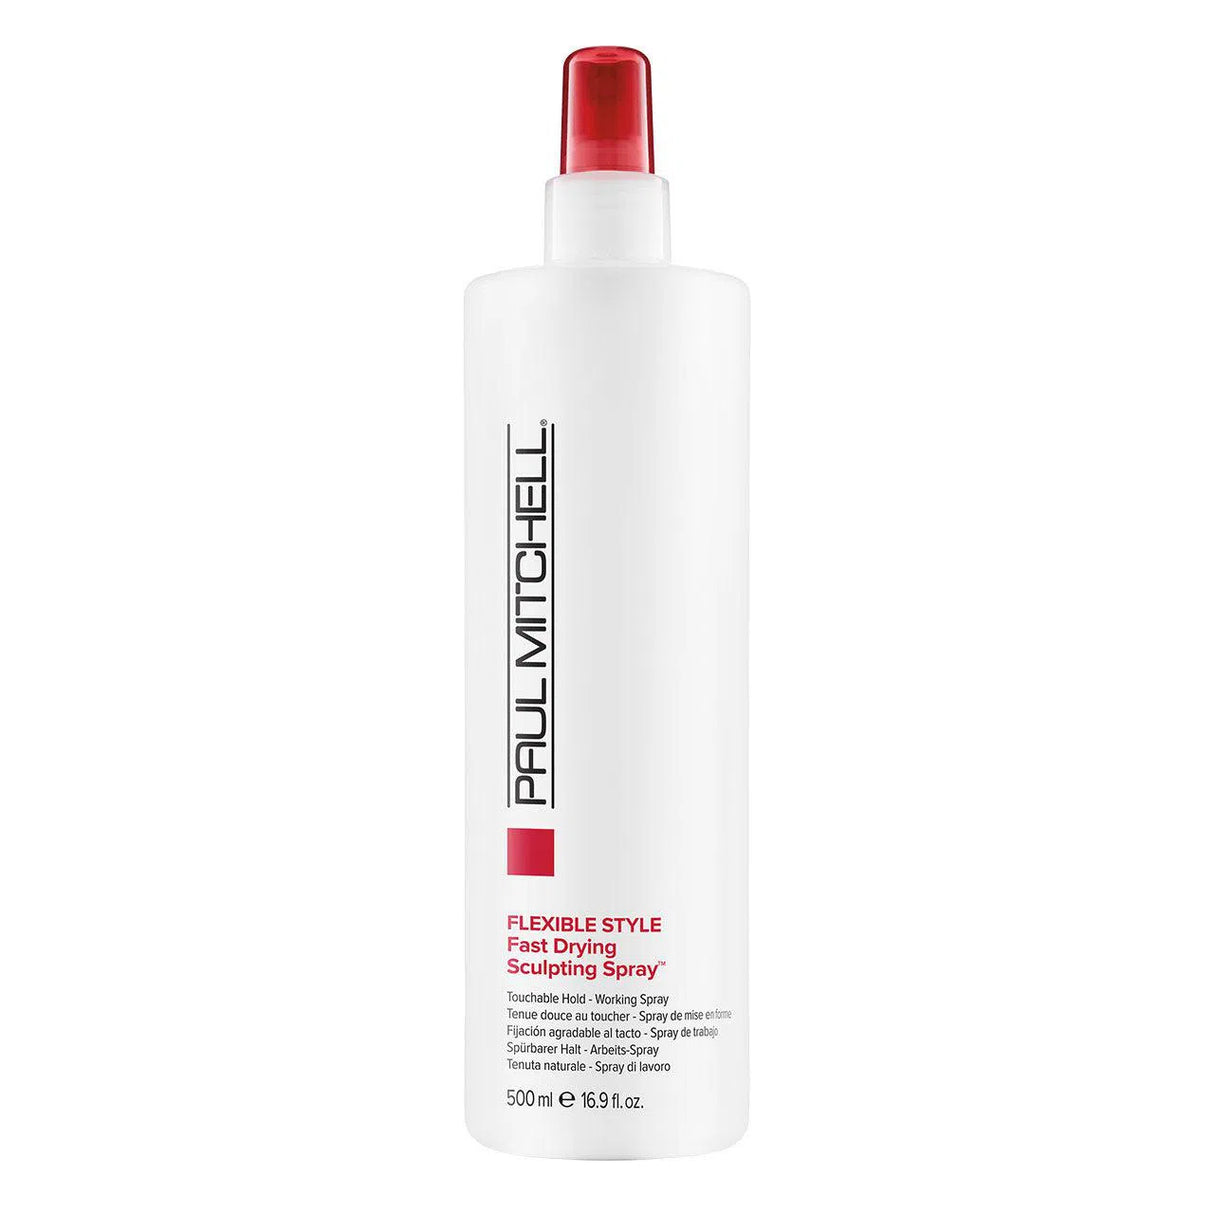 Flexible Style Fast Drying Sculpting Spray